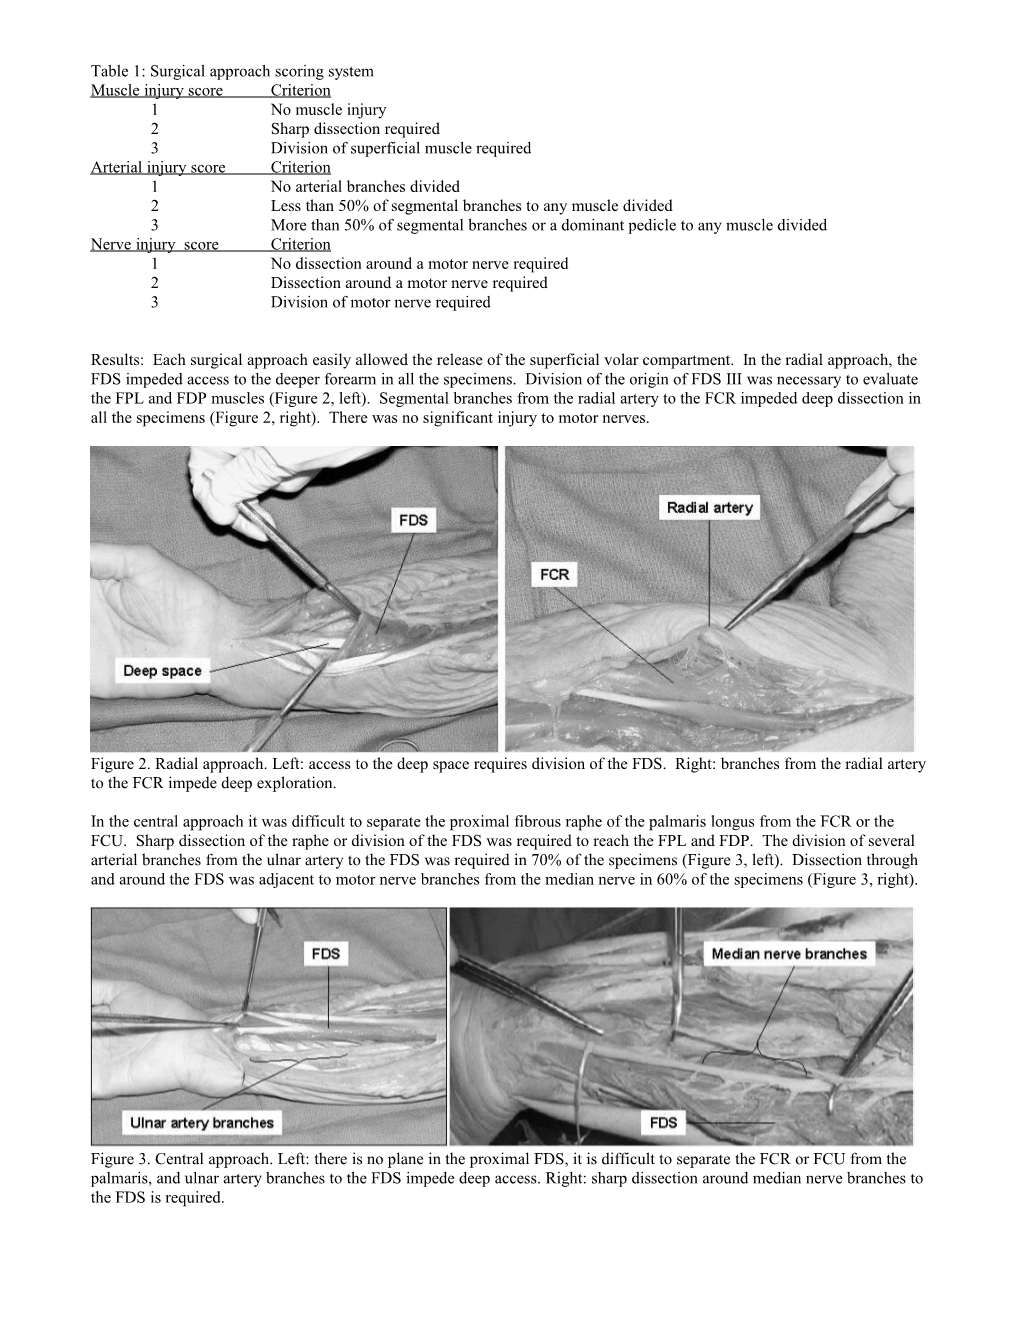 Forearm Compartment Syndrome: an Incision